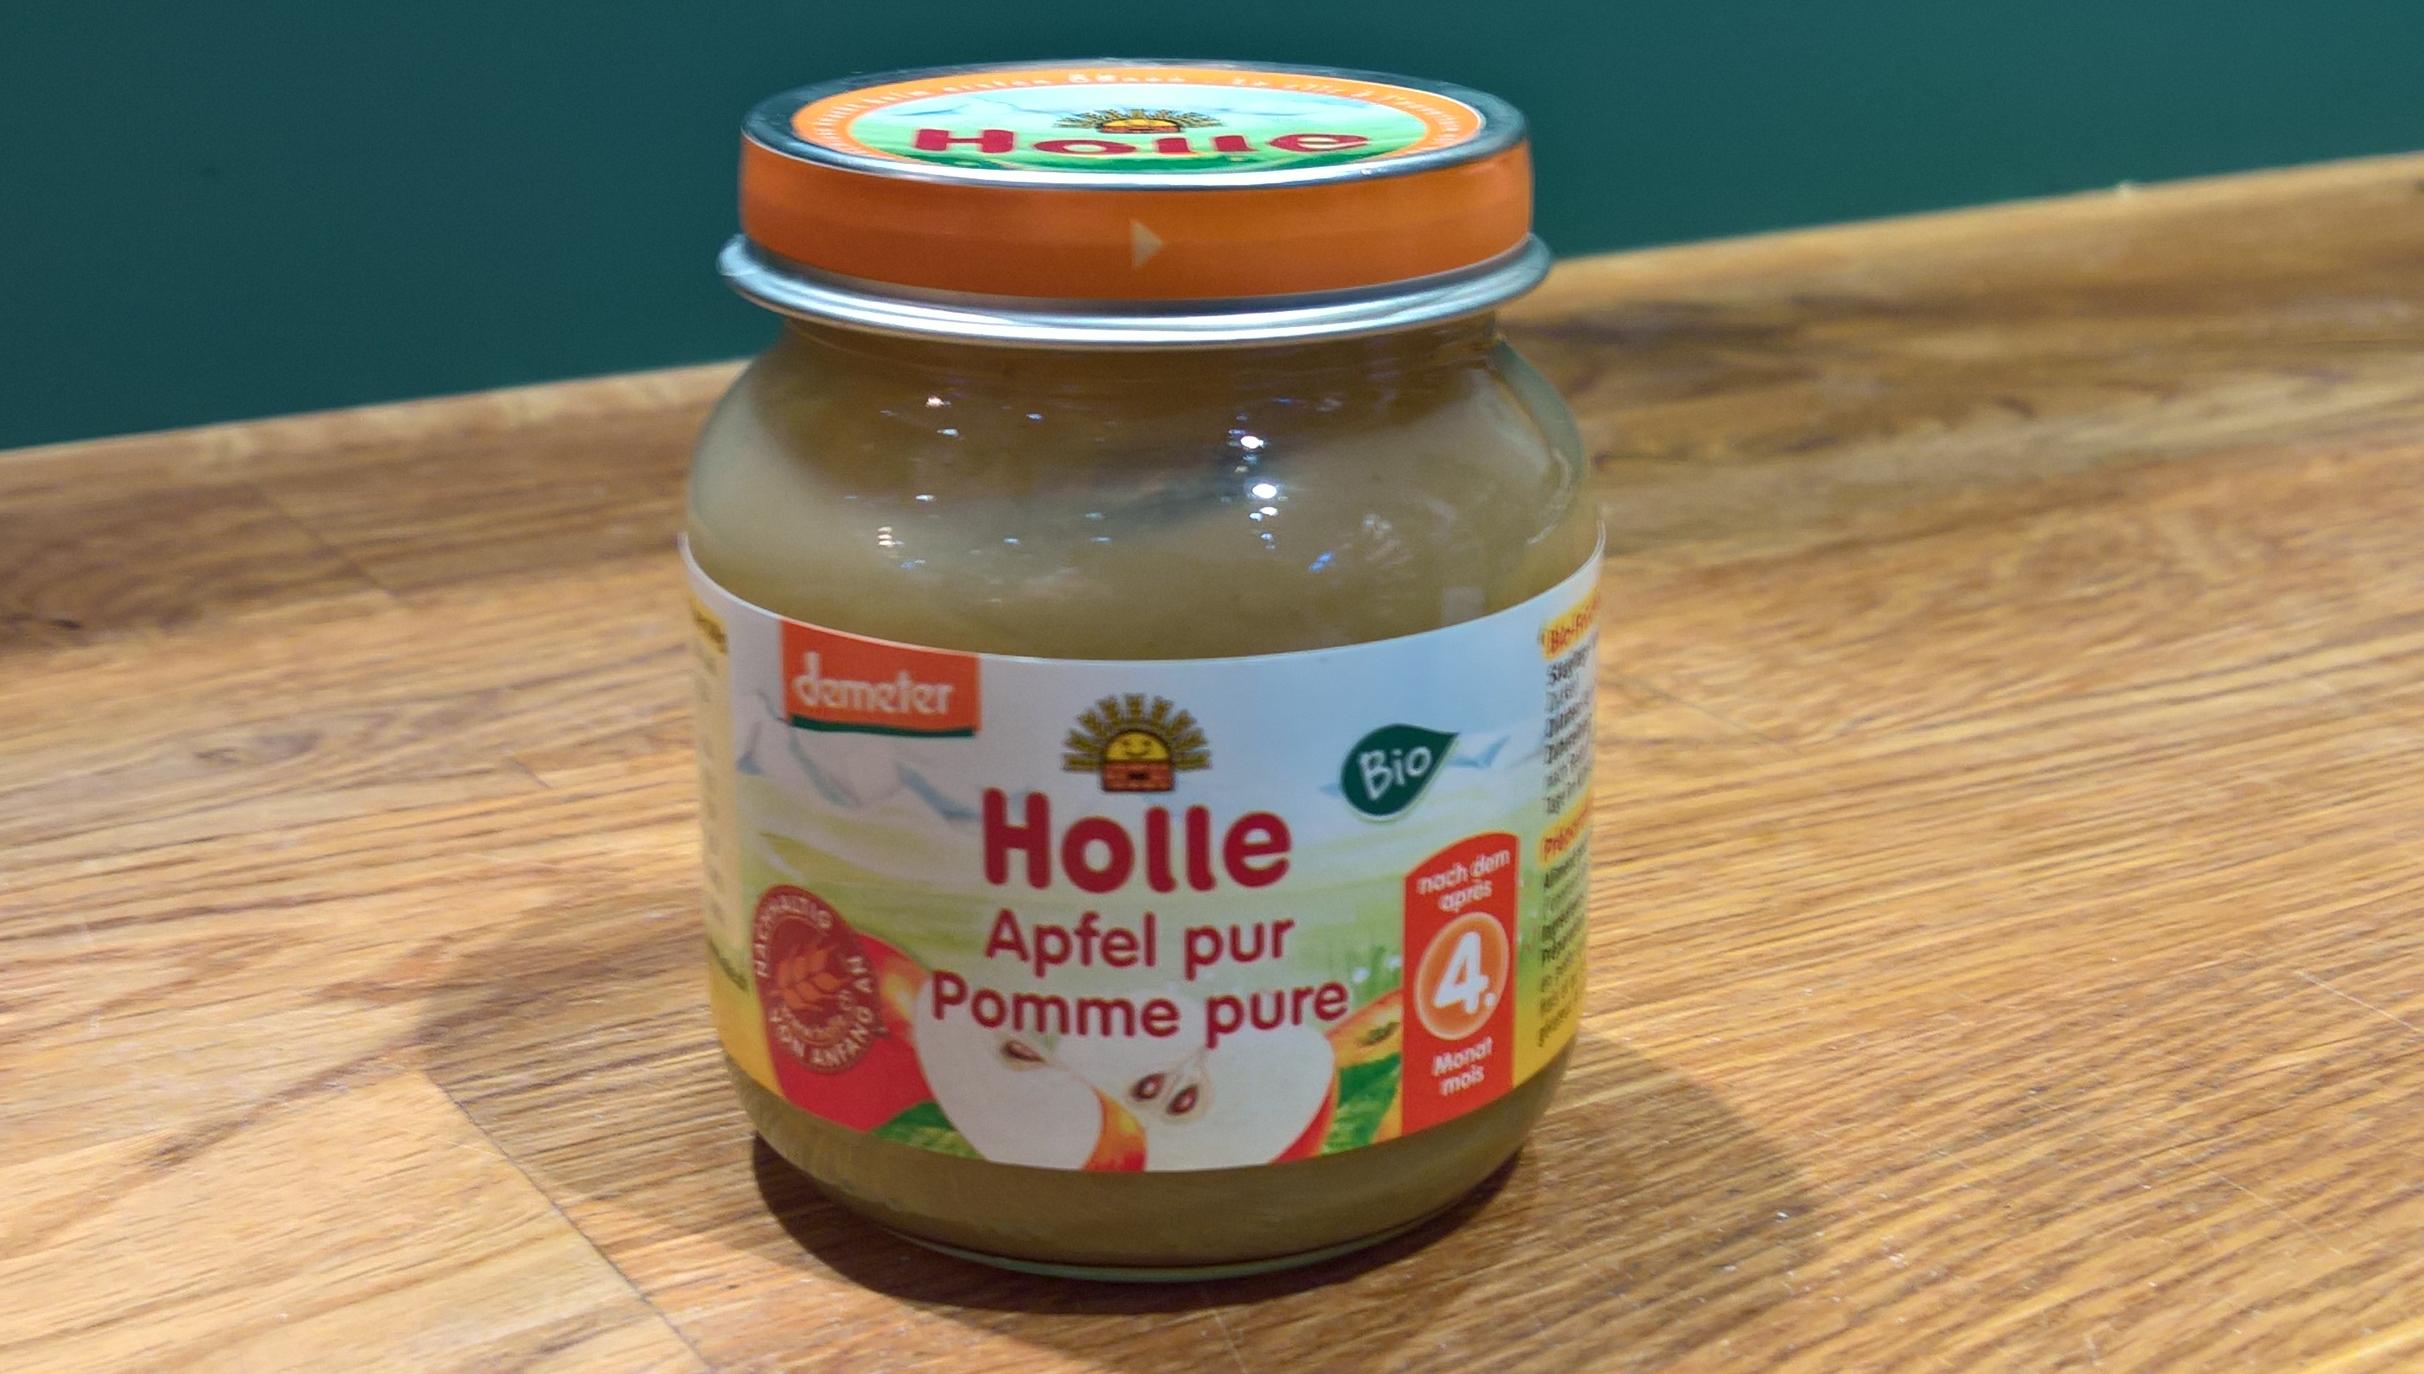 Apfel pur 125g - Holle